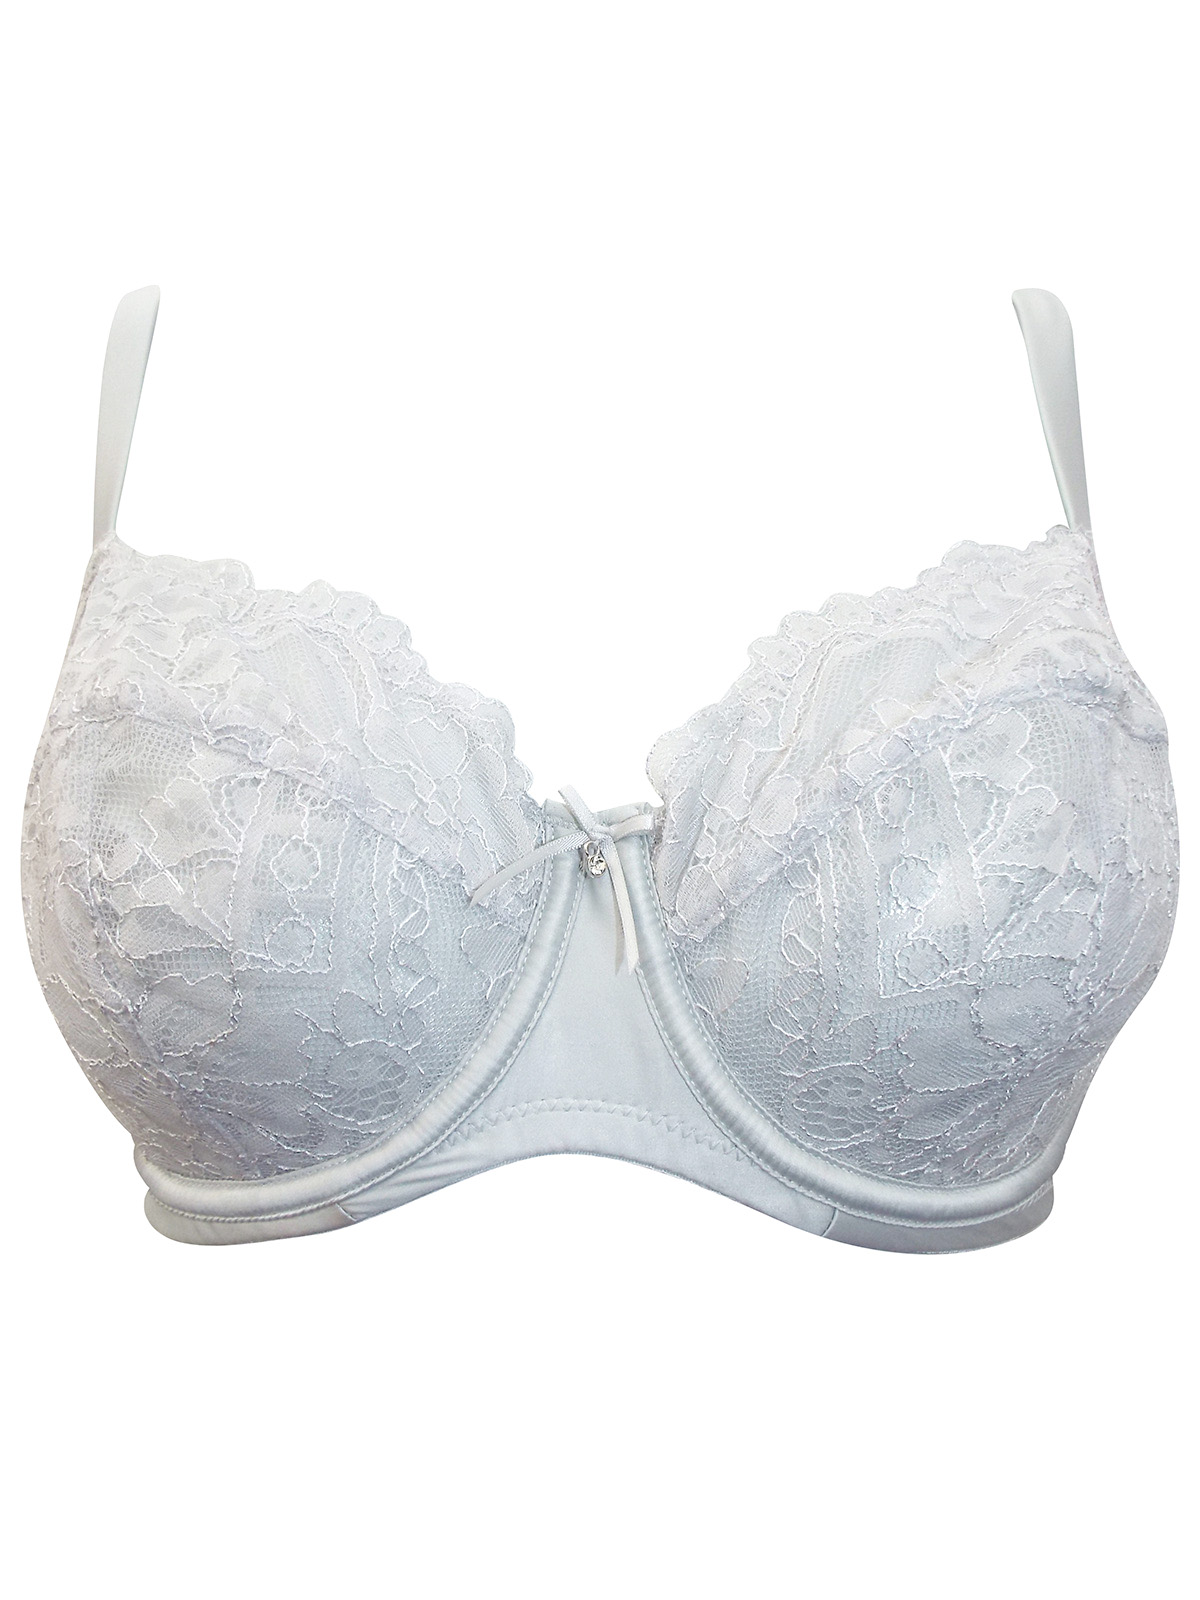 Boux Avenue - - Boux Avenue SILVER Lace Full Cup Wired Bra - Size 30 to ...